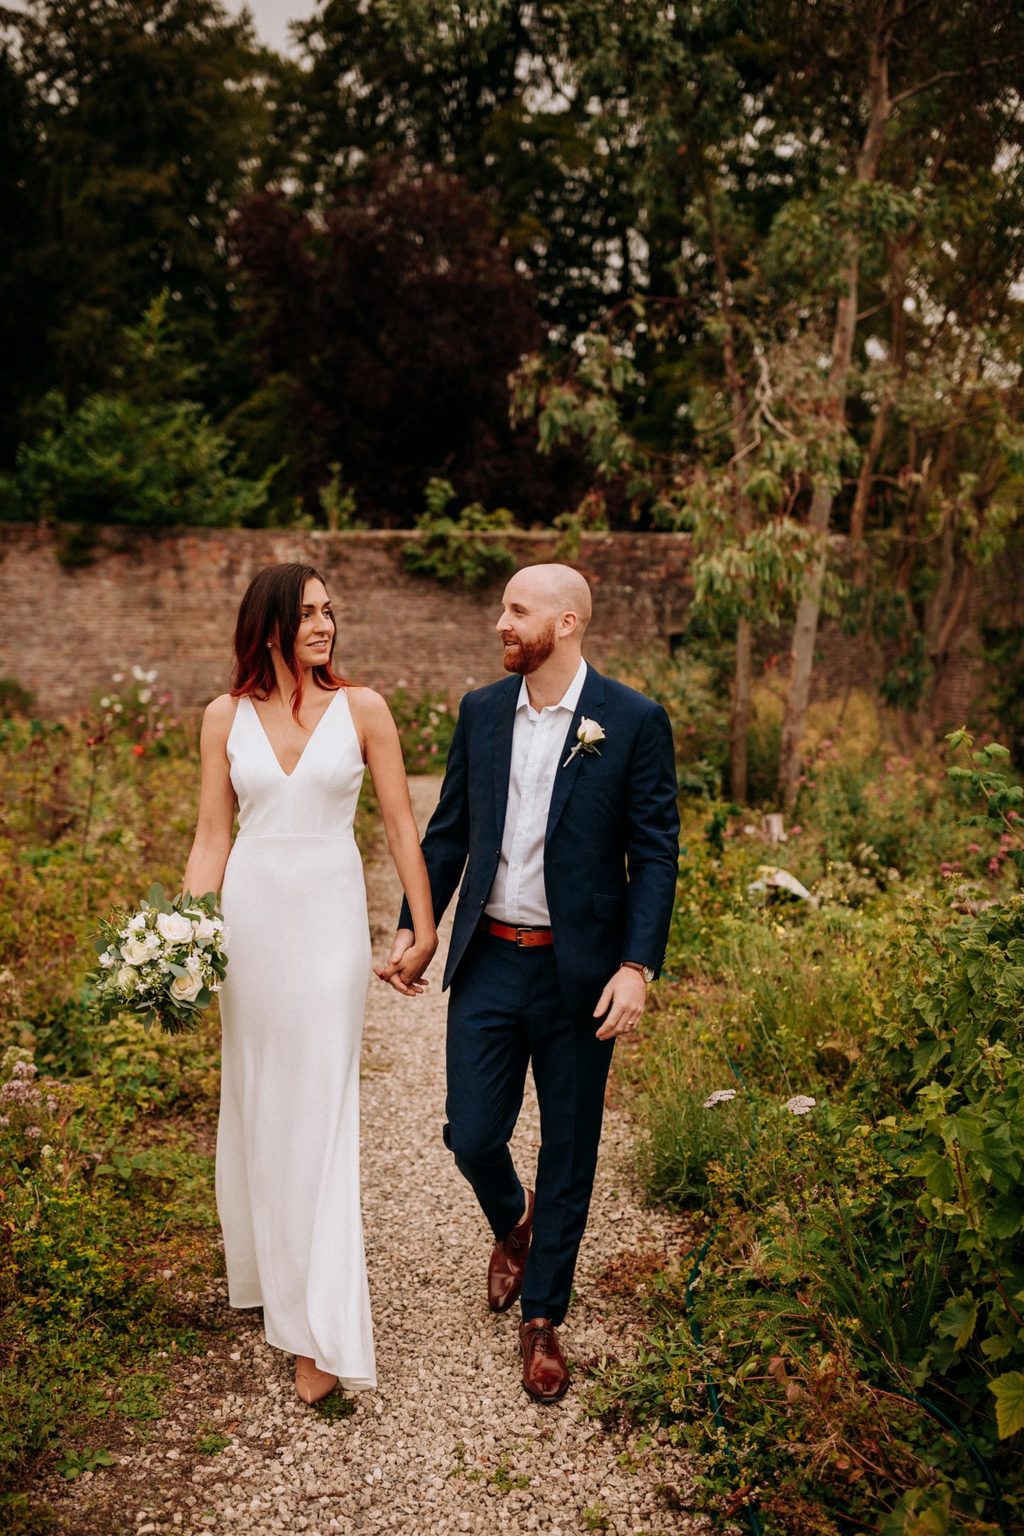 A couple walking in the garden during a castle wedding at Swinton Park Hotel in Yorkshire